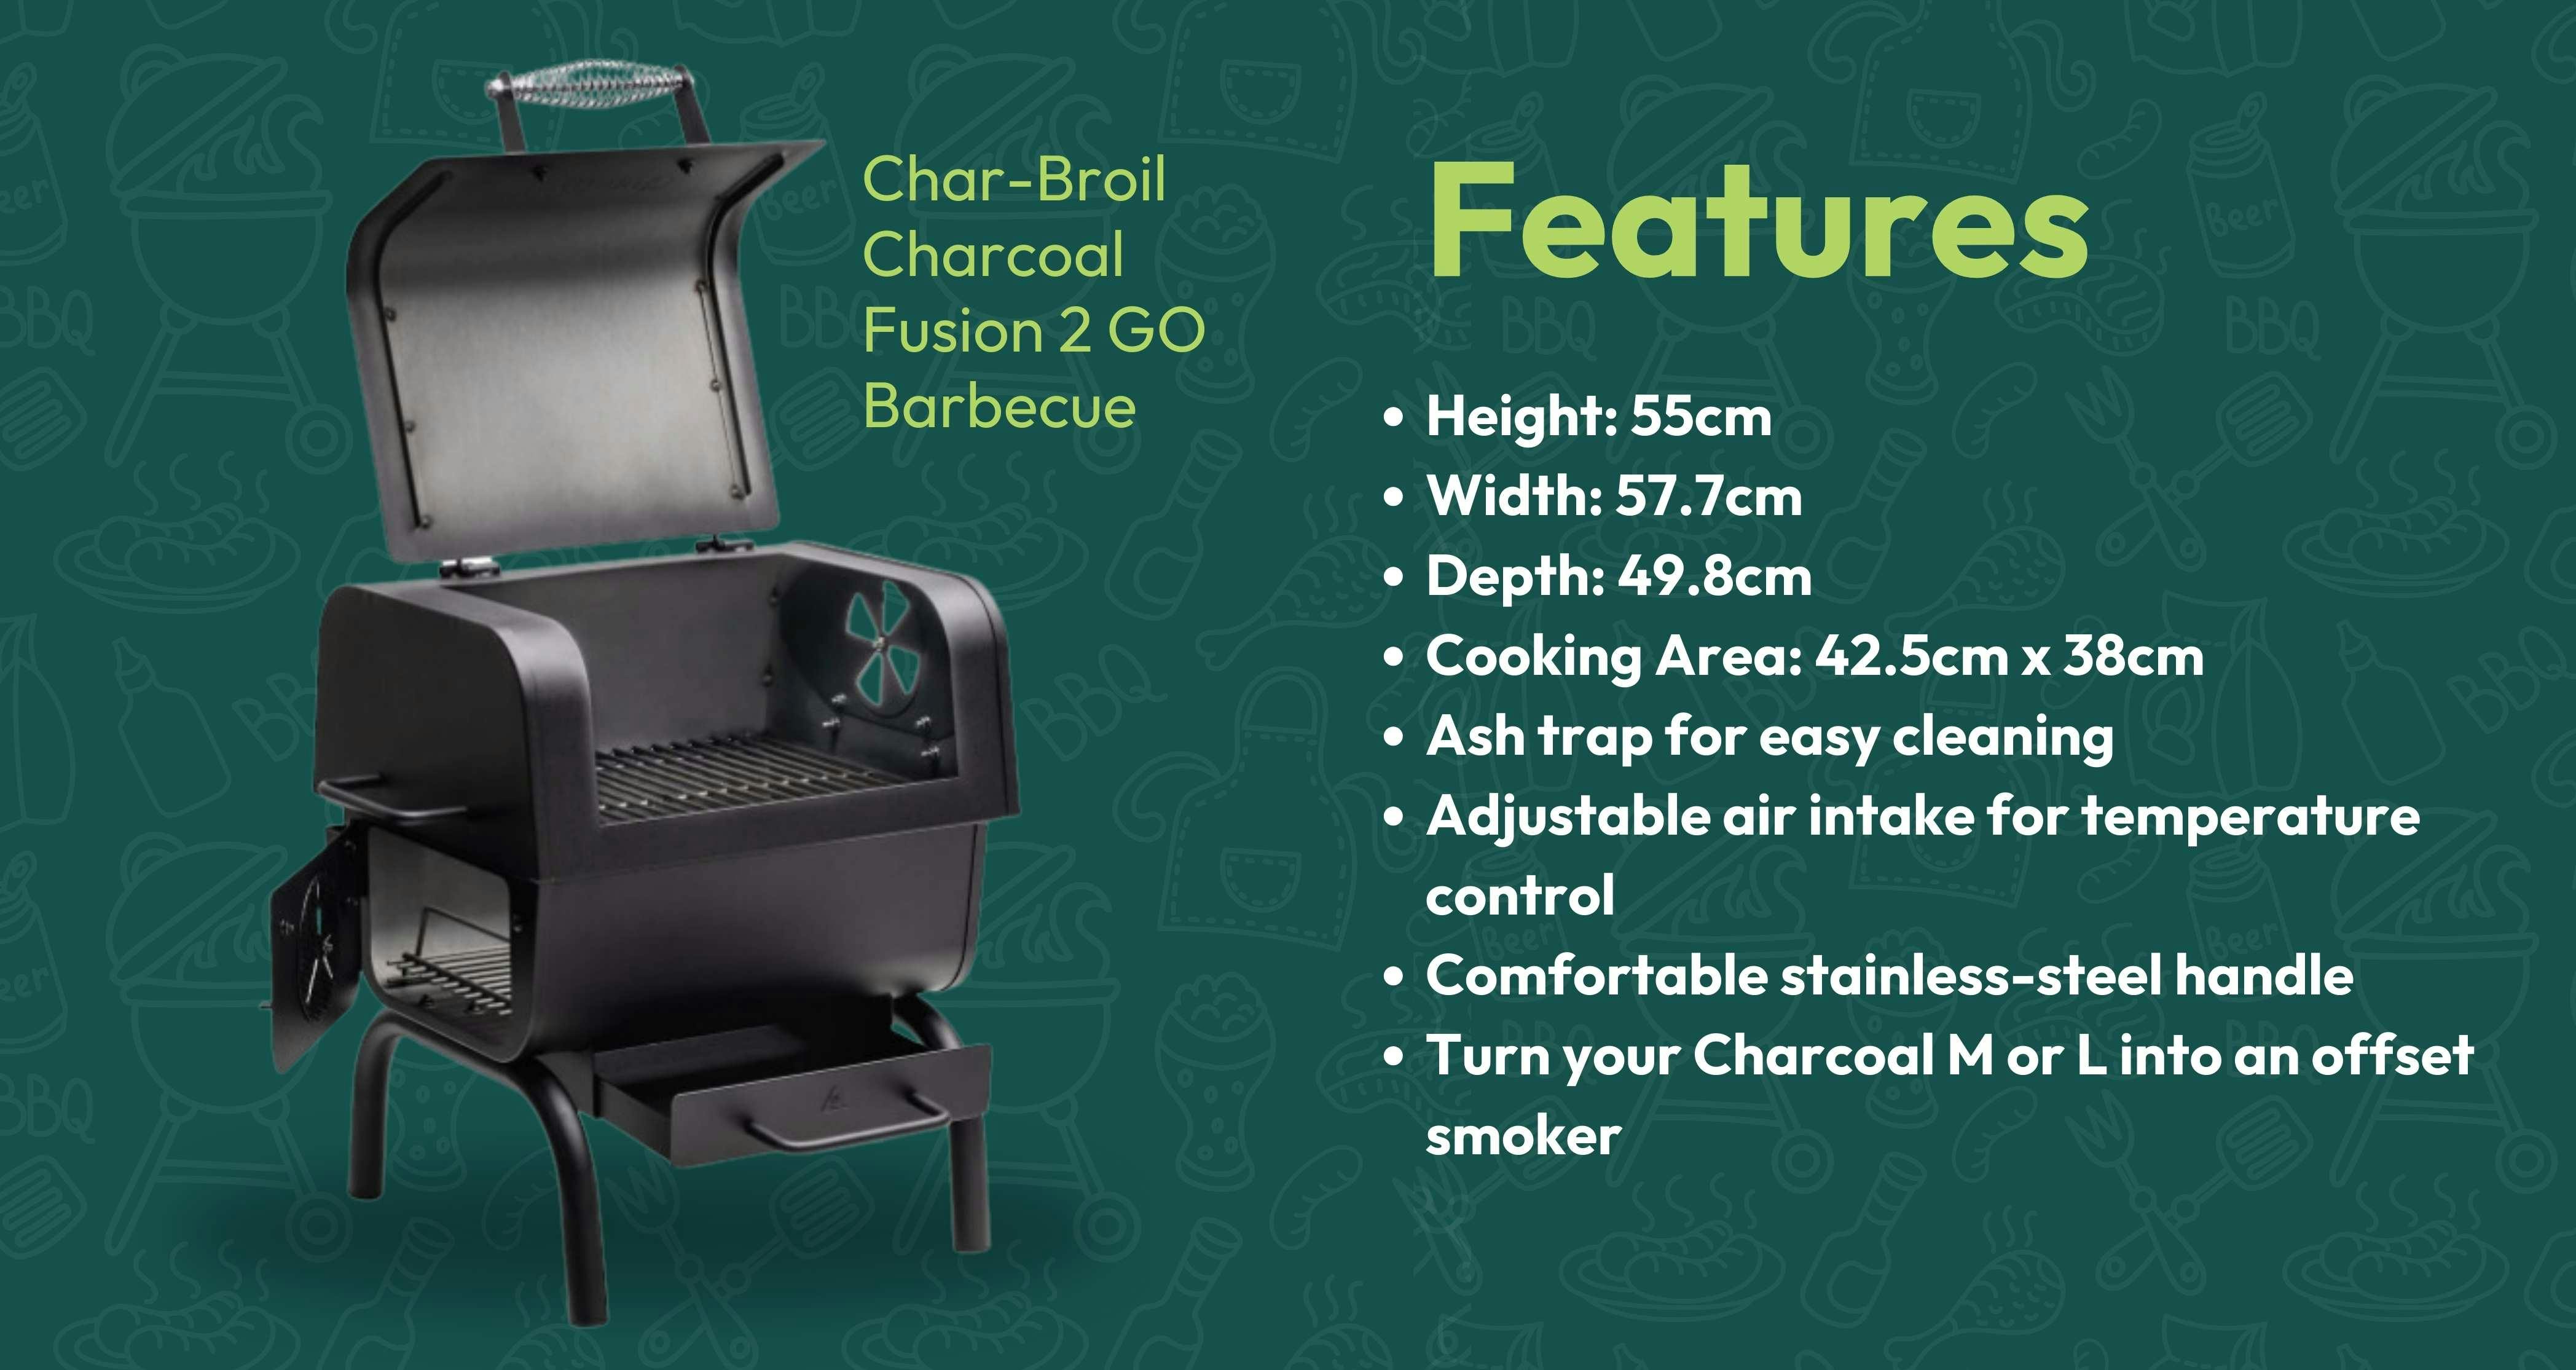 Char-Broil  Charcoal  Fusion 2 GO  Barbecue